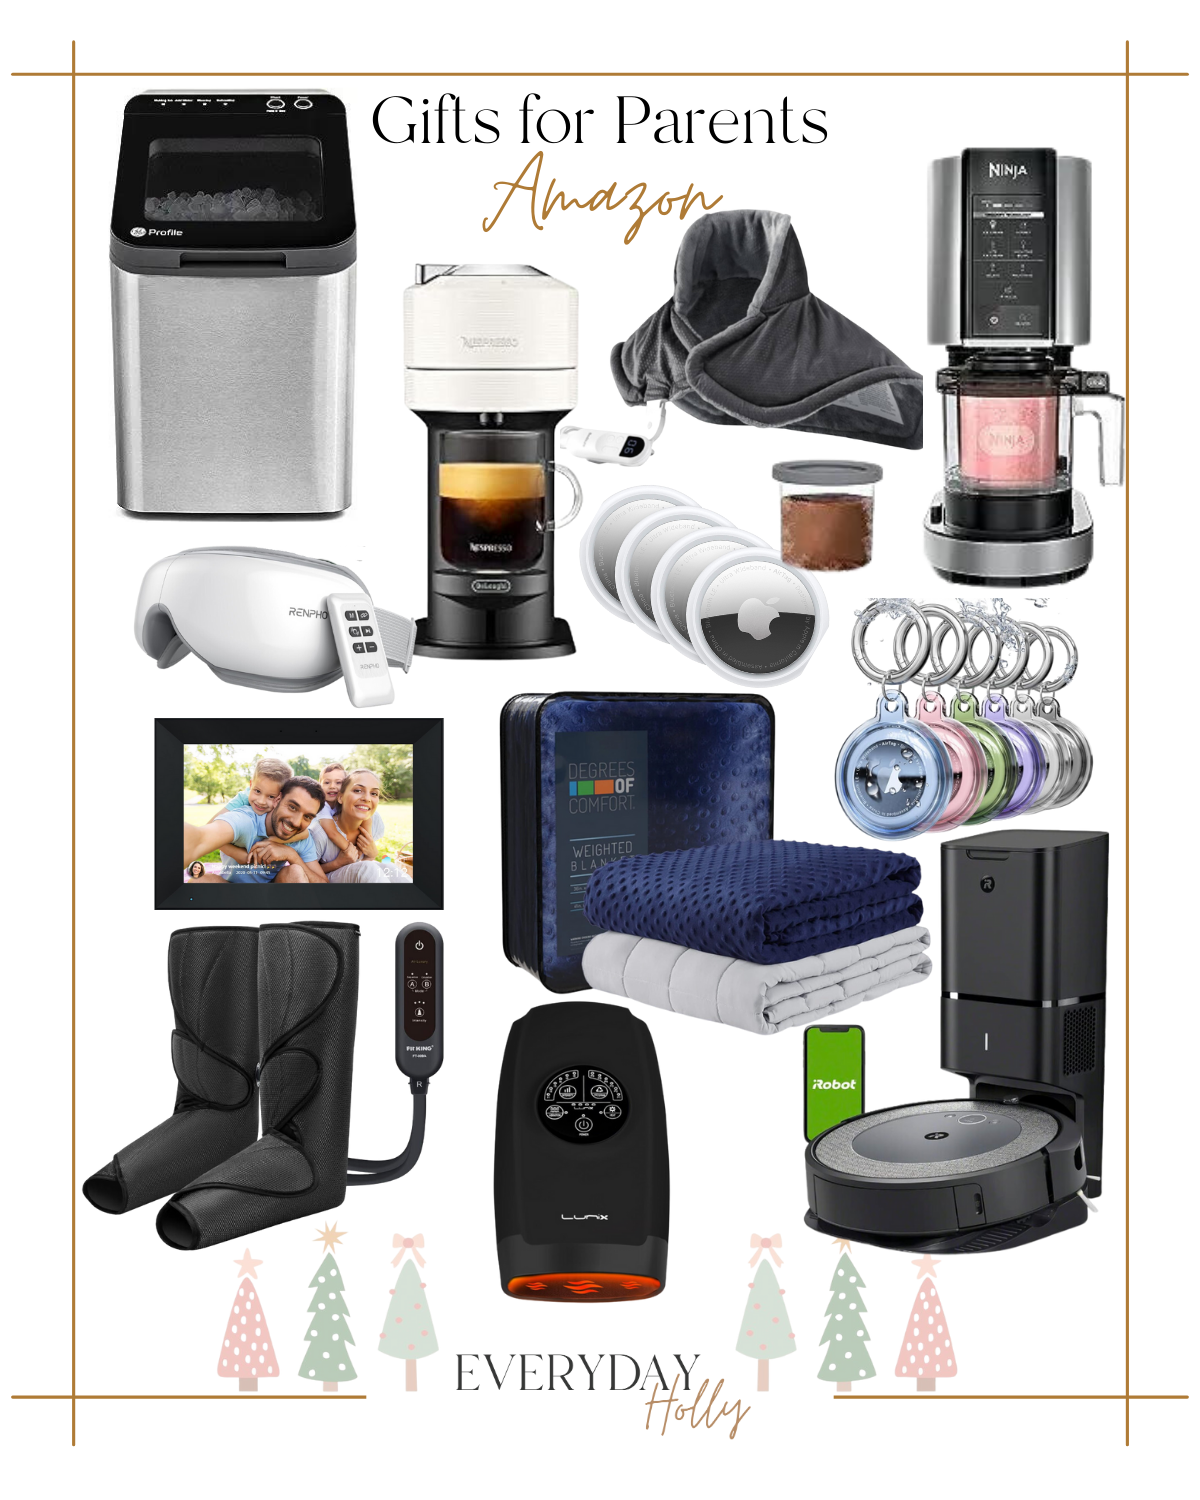 10 Holiday Gift Guides for Everyone This Season | #holiday #giftguide #giftideas #2023 #christmas #gifts #amazon #giftsforparents #giftsforgrandparents #icemaker #weightedblanket #heatingpad #eyemassager #vacuum #roomba #footmassager #handmassager